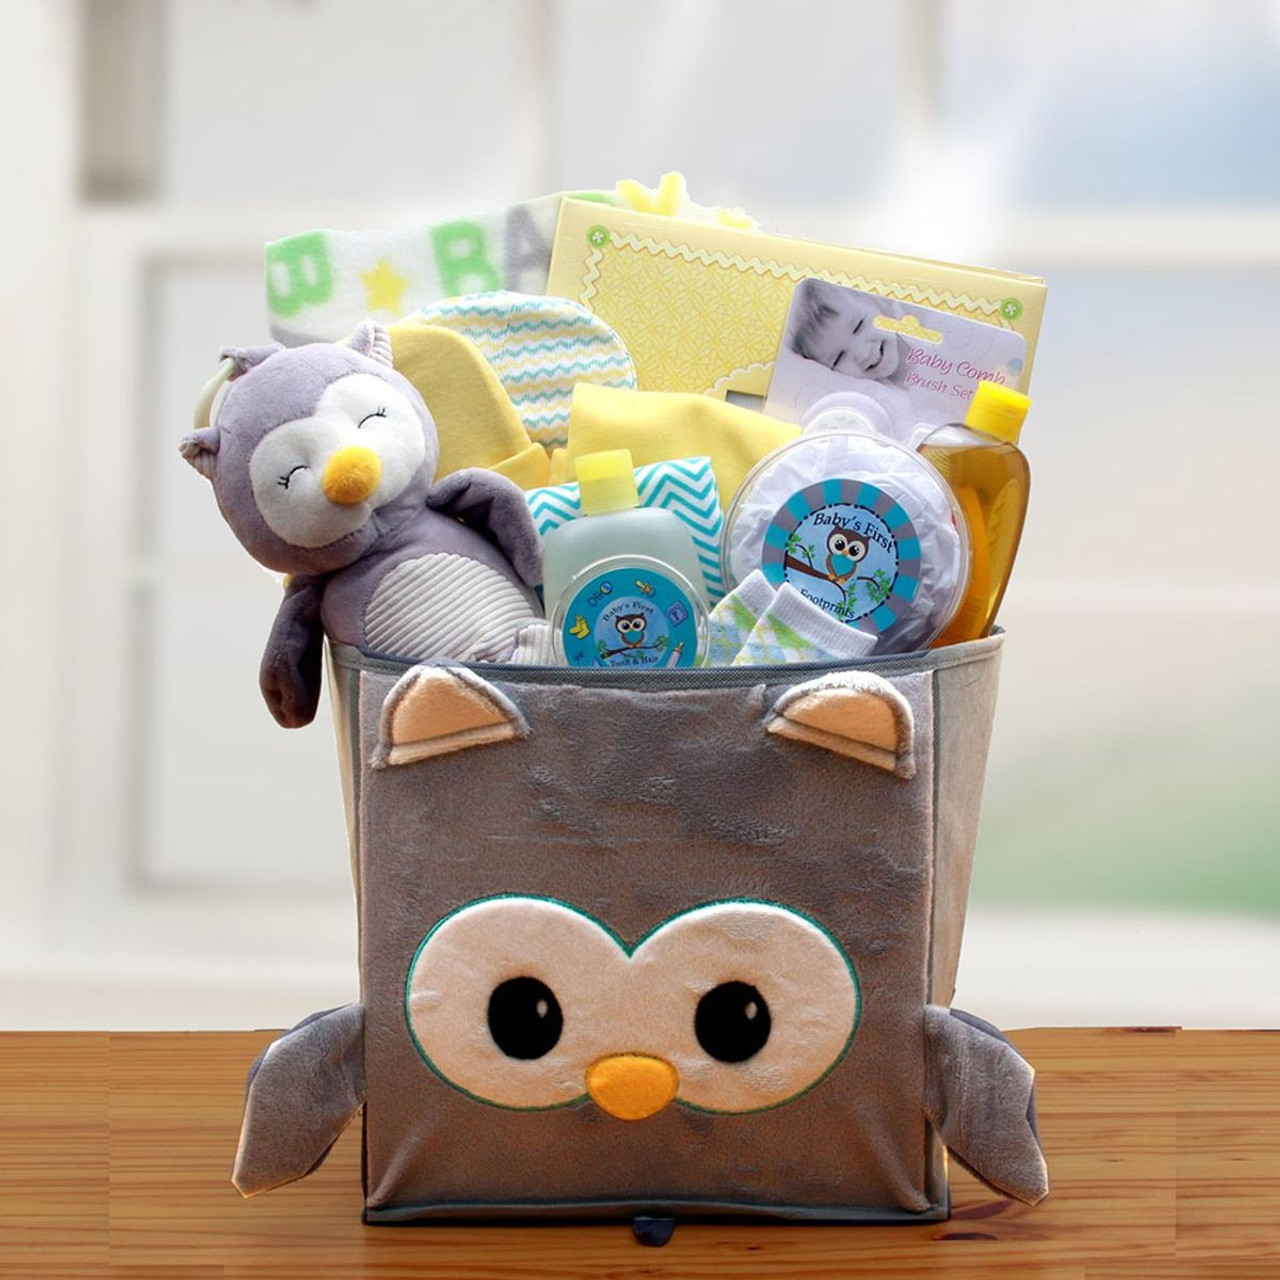 A Little Hoot New Baby Gift Basket product image